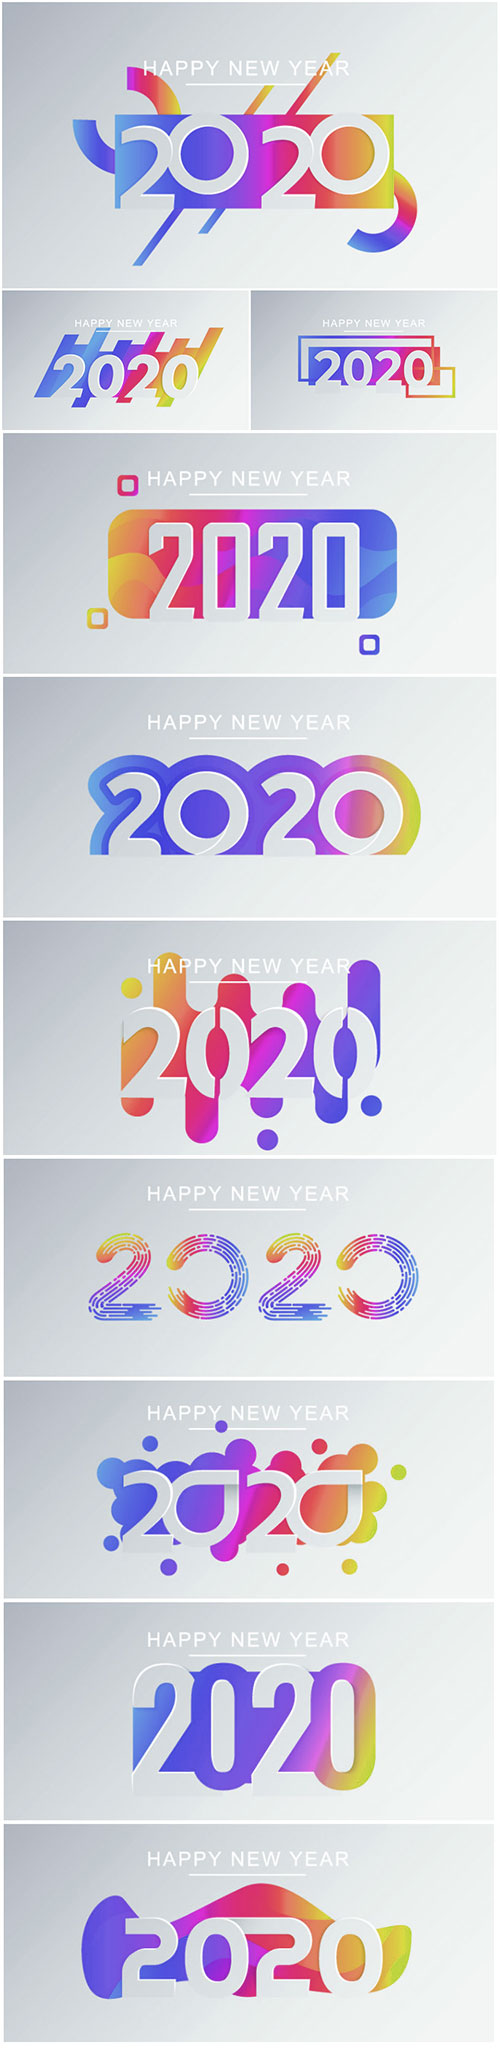 Happy New Year greeting card template, creative paper cut